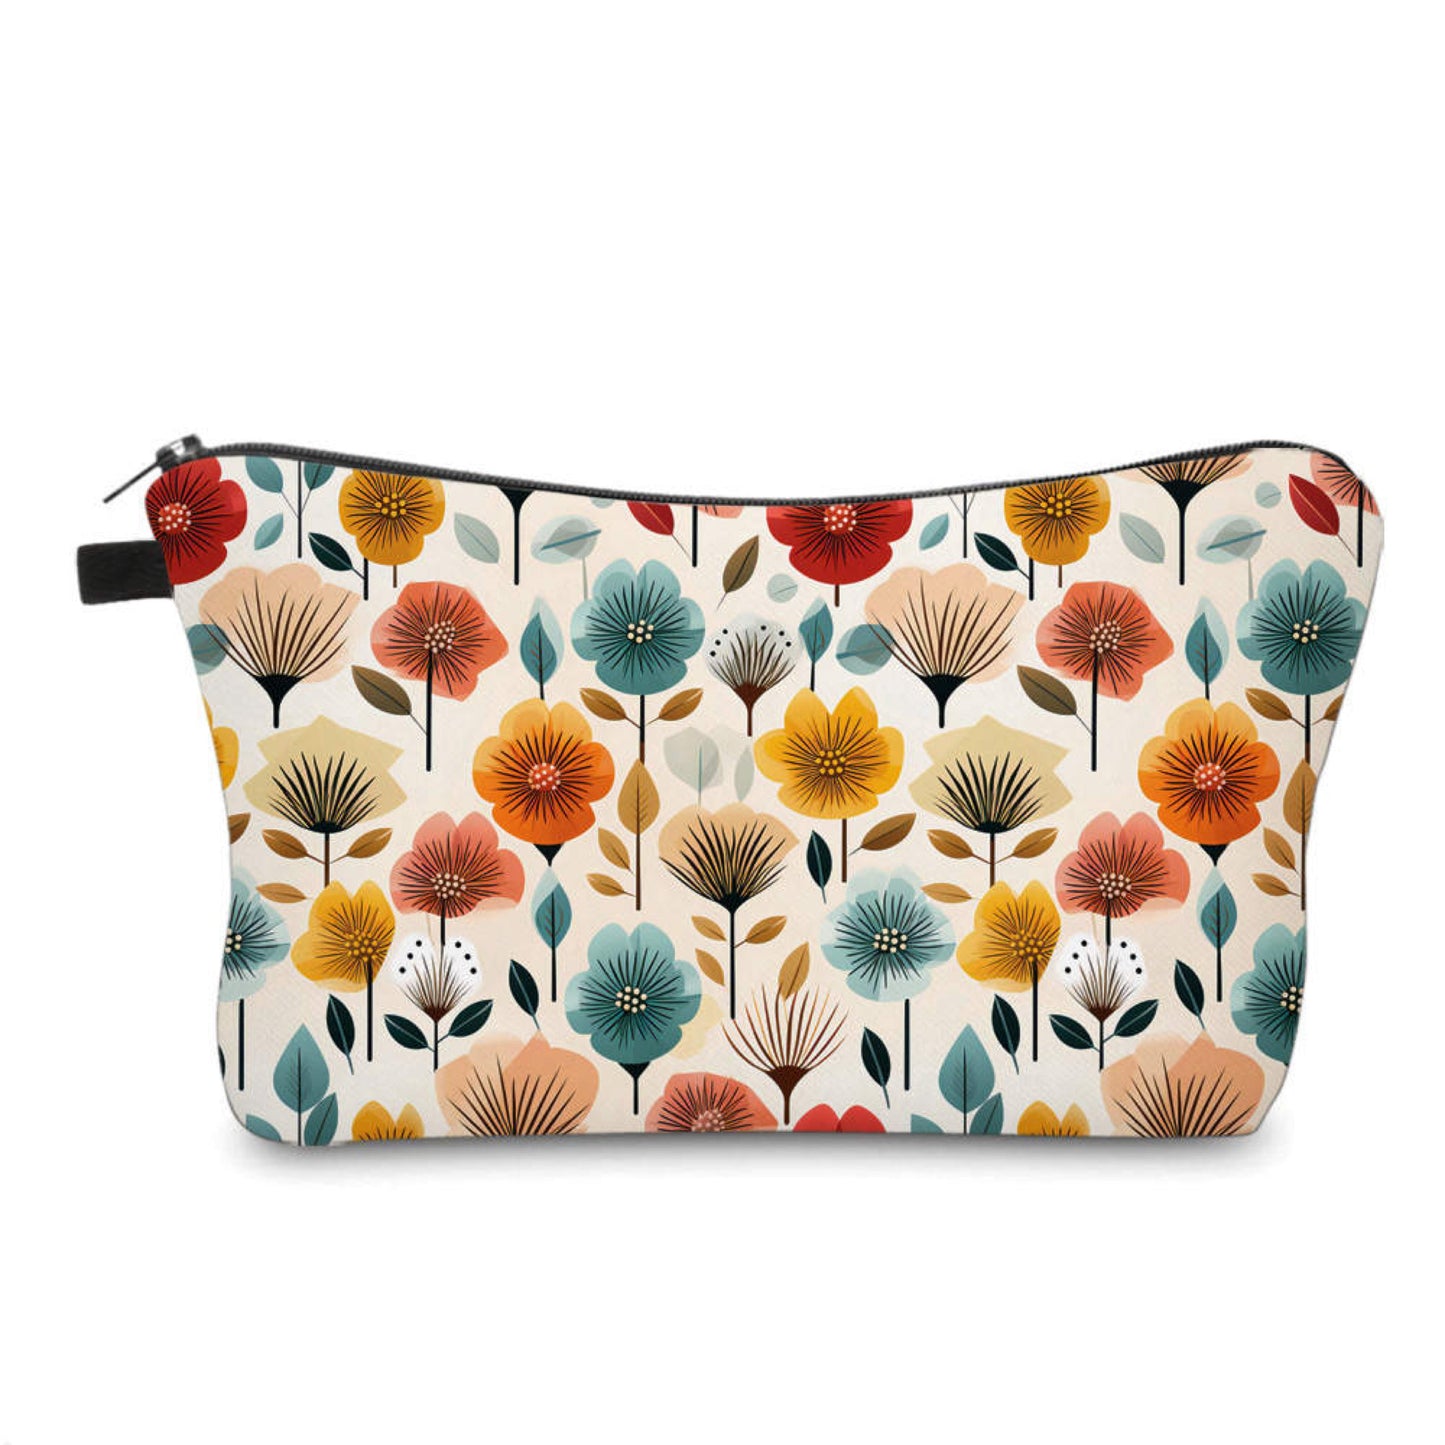 Pouch - Floral Blooms Red Orange Blue